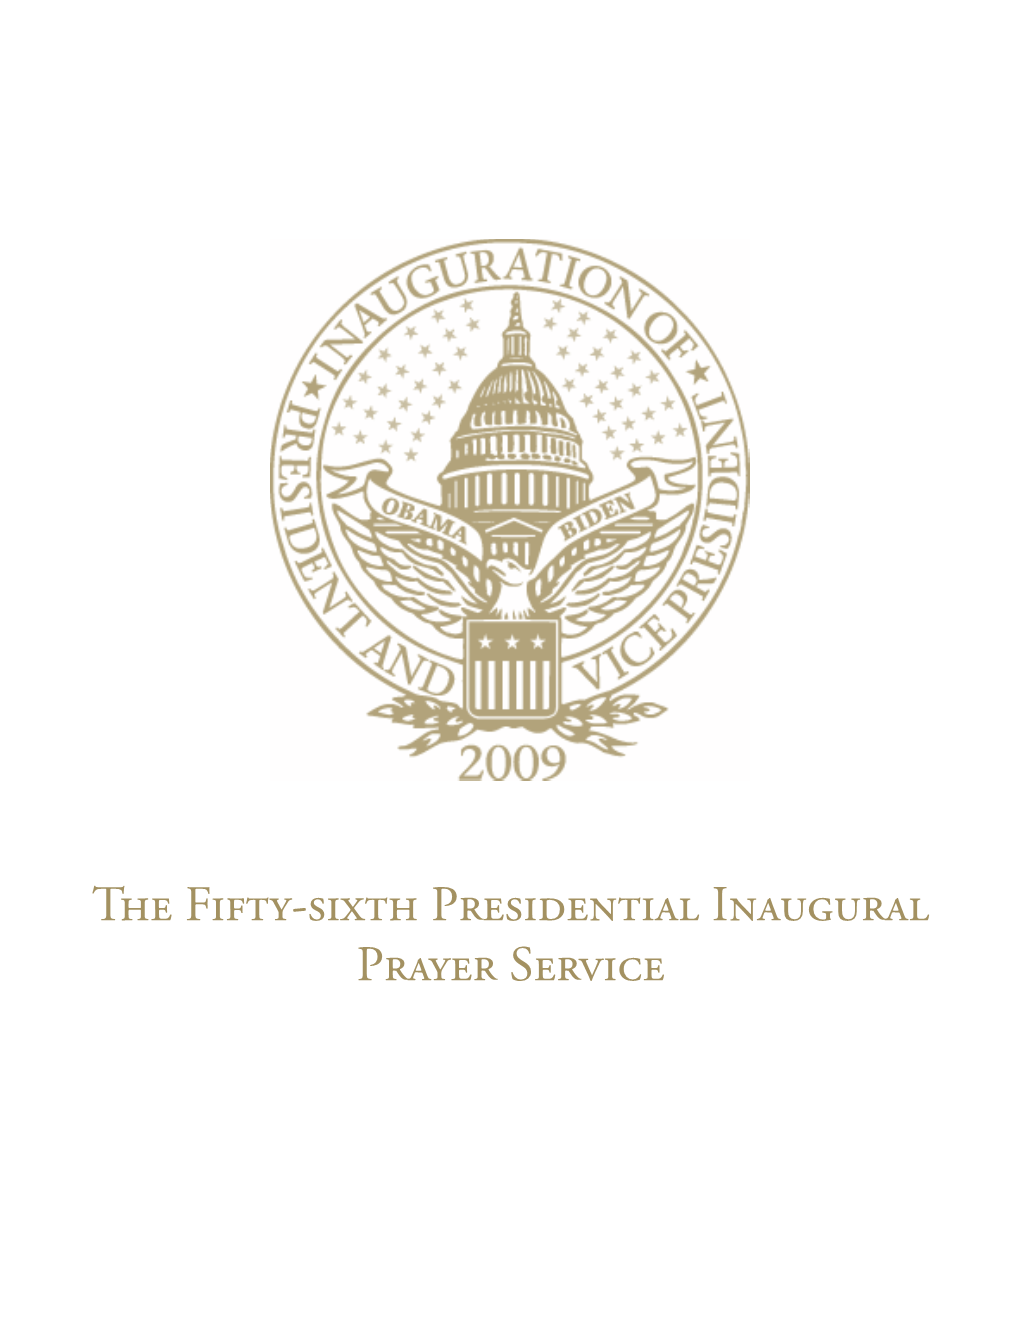 The Fifty-Sixth Presidential Inaugural Prayer Service